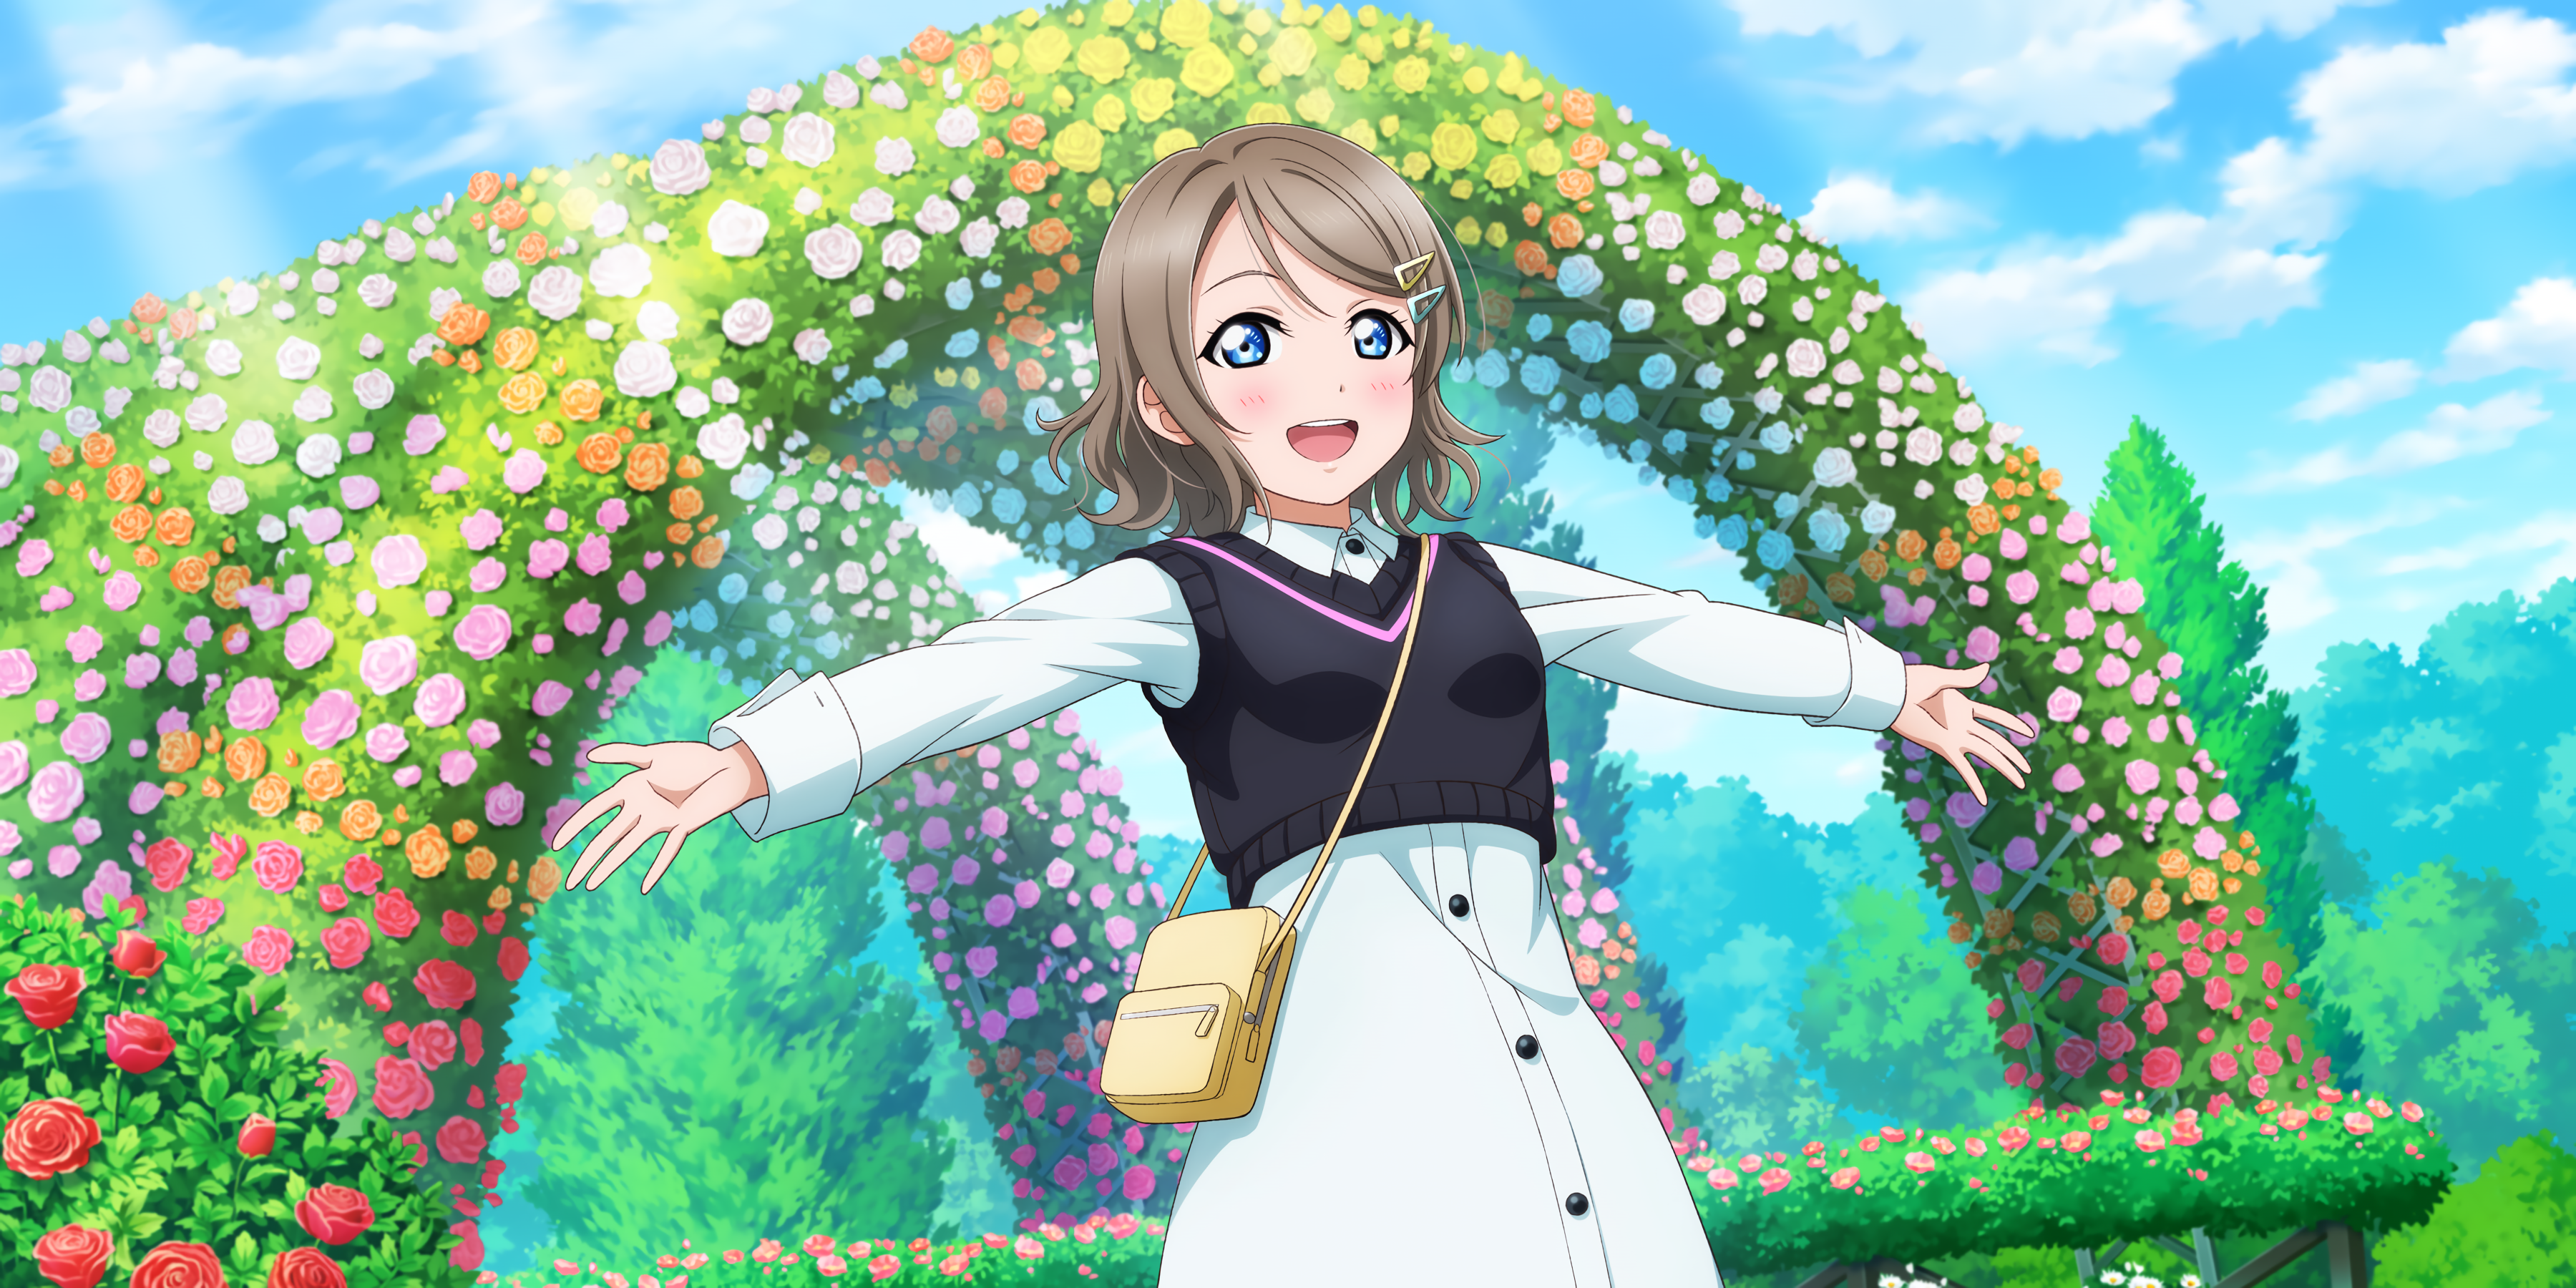 Anime 3600x1800 Watanabe You Love Live! Sunshine Love Live! anime anime girls flowers blushing purse looking at viewer sunlight clouds trees